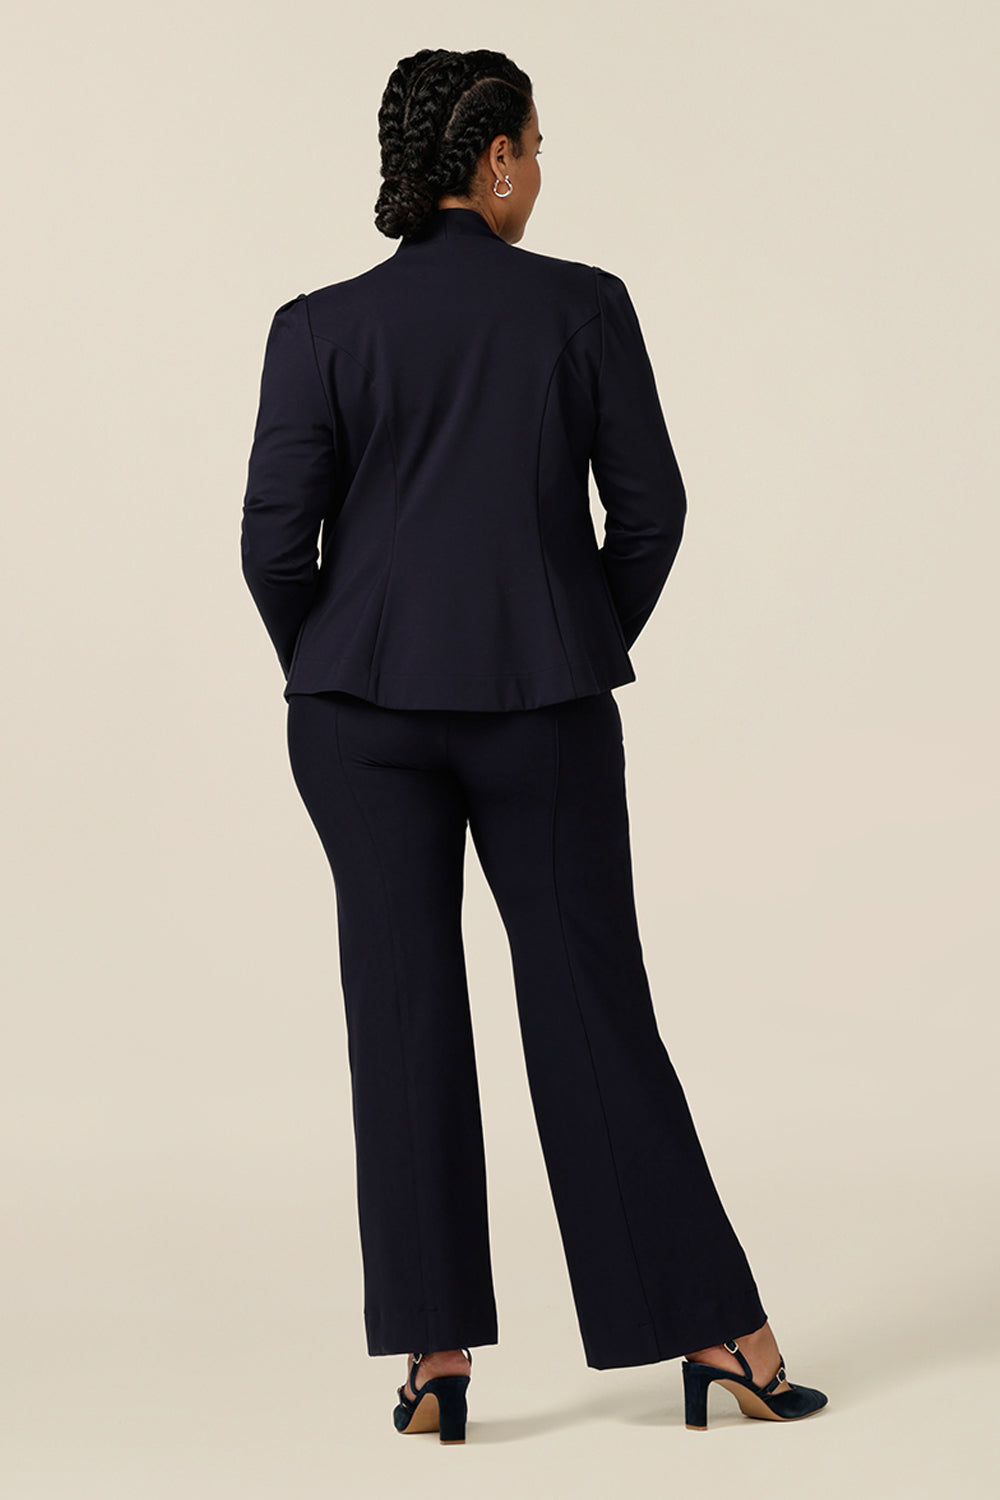 Back view of a size 12, curvy woman wearing a soft tailored navy jacket with navy workwear pants. Made in Australia for petite to plus sizes, the stretch ponte jersey jacket is well-fitting on womanly curves.